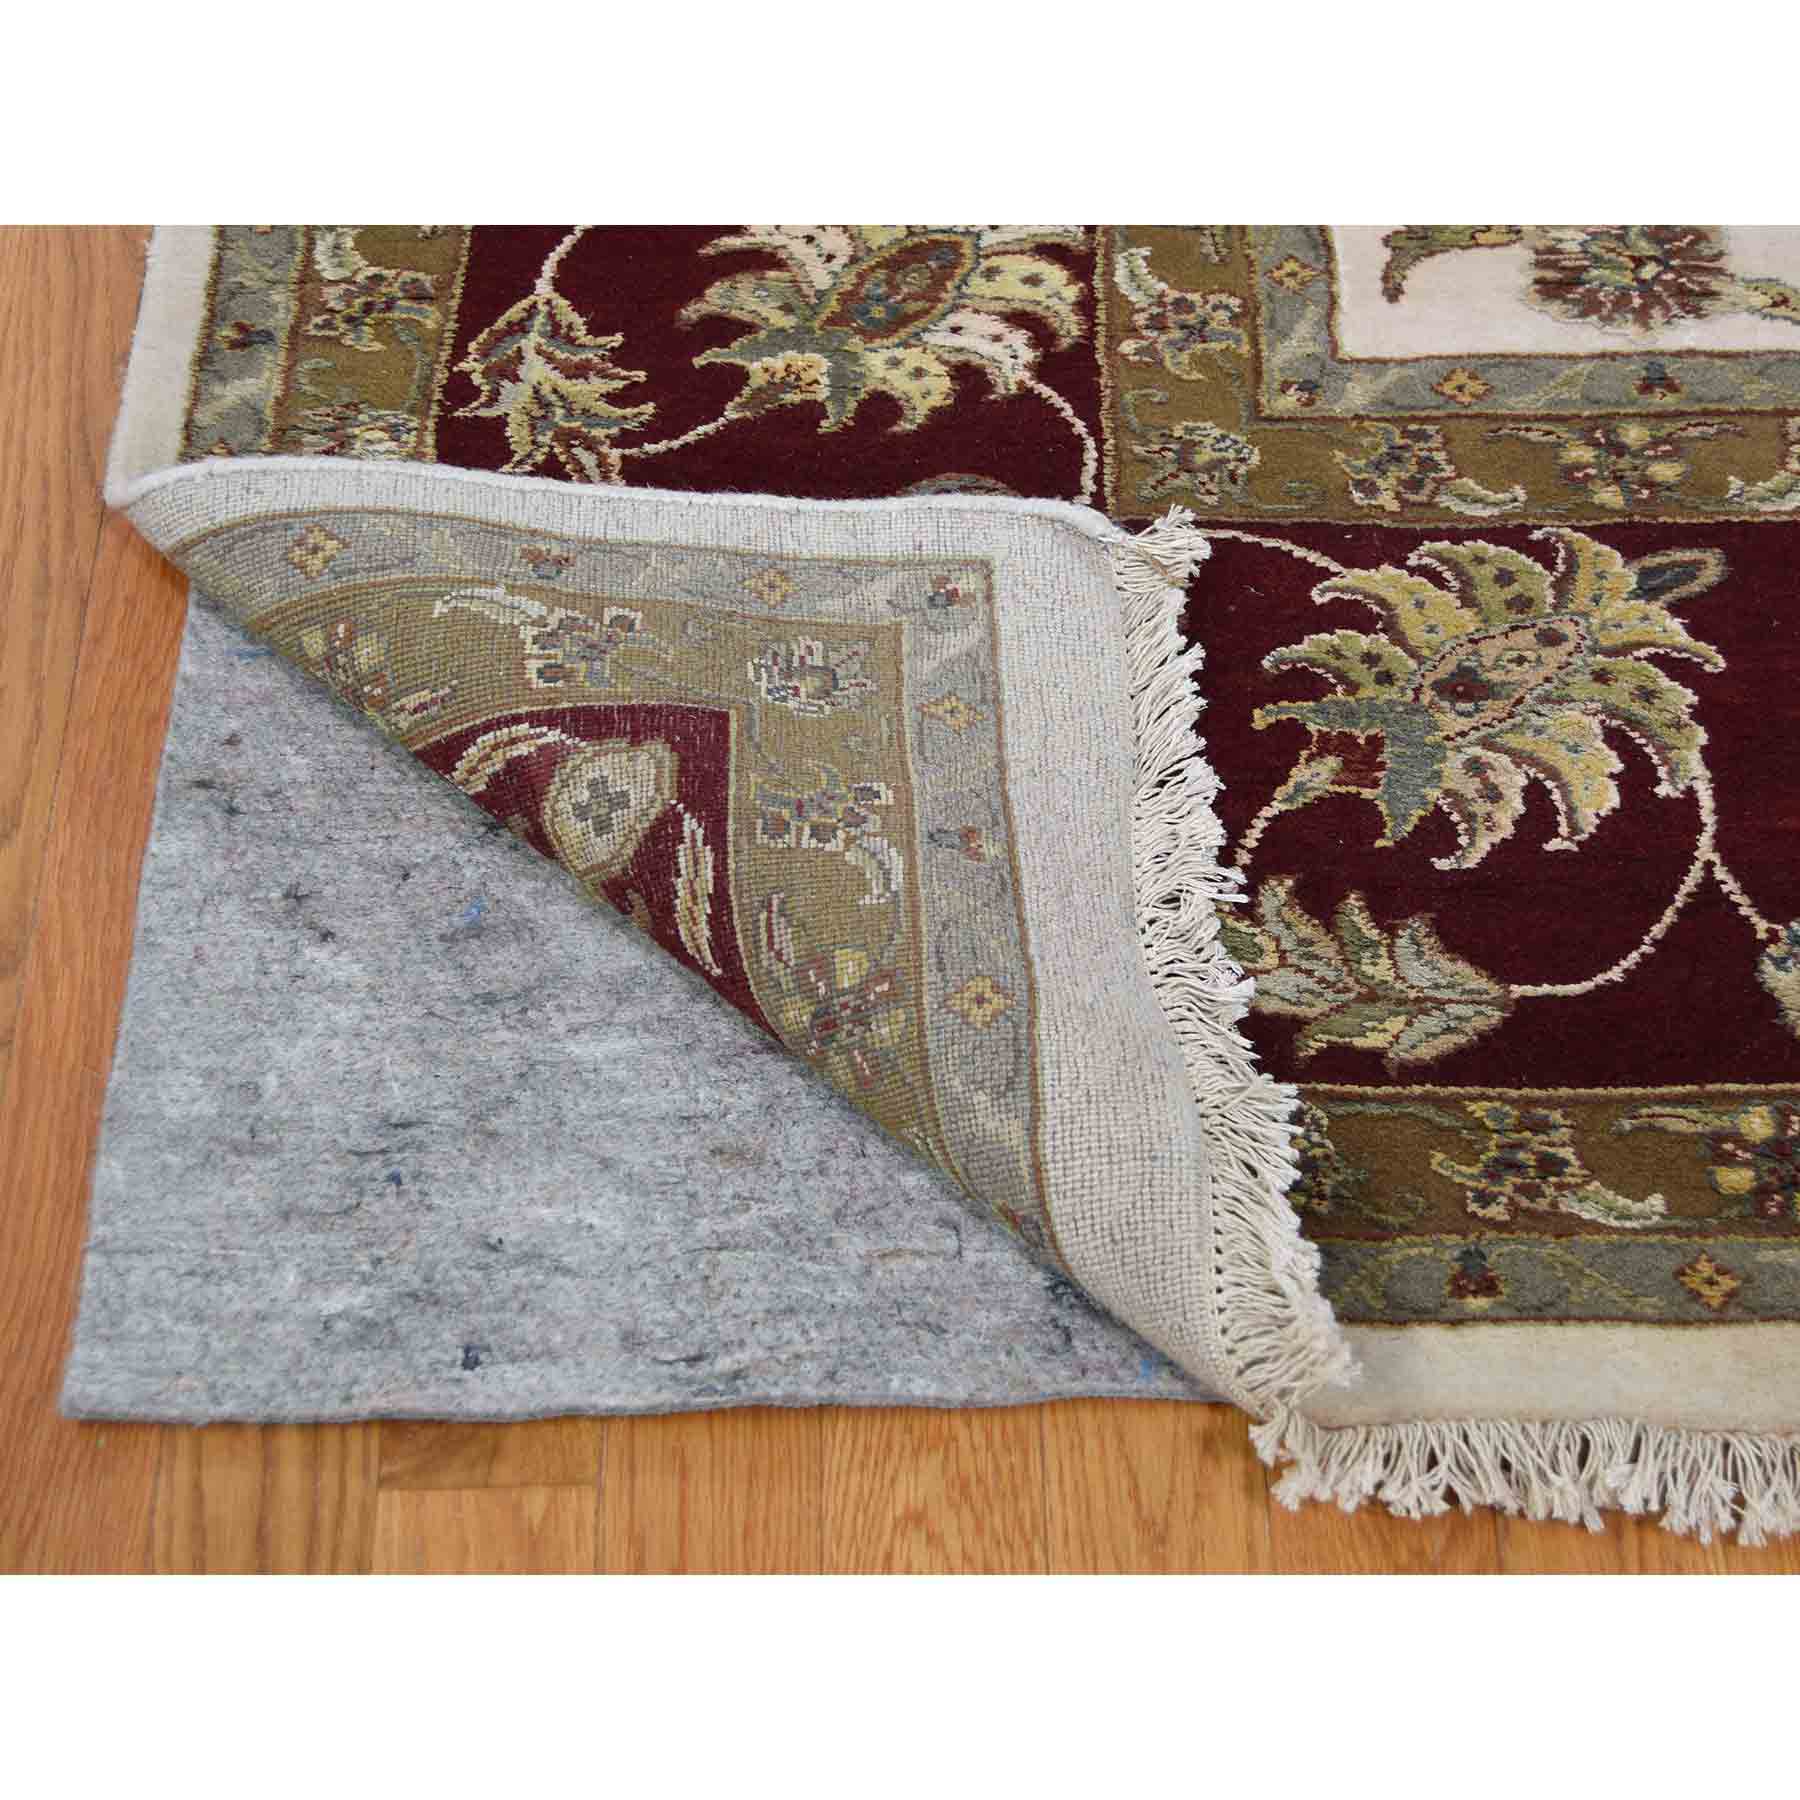 Rajasthan-Hand-Knotted-Rug-228795